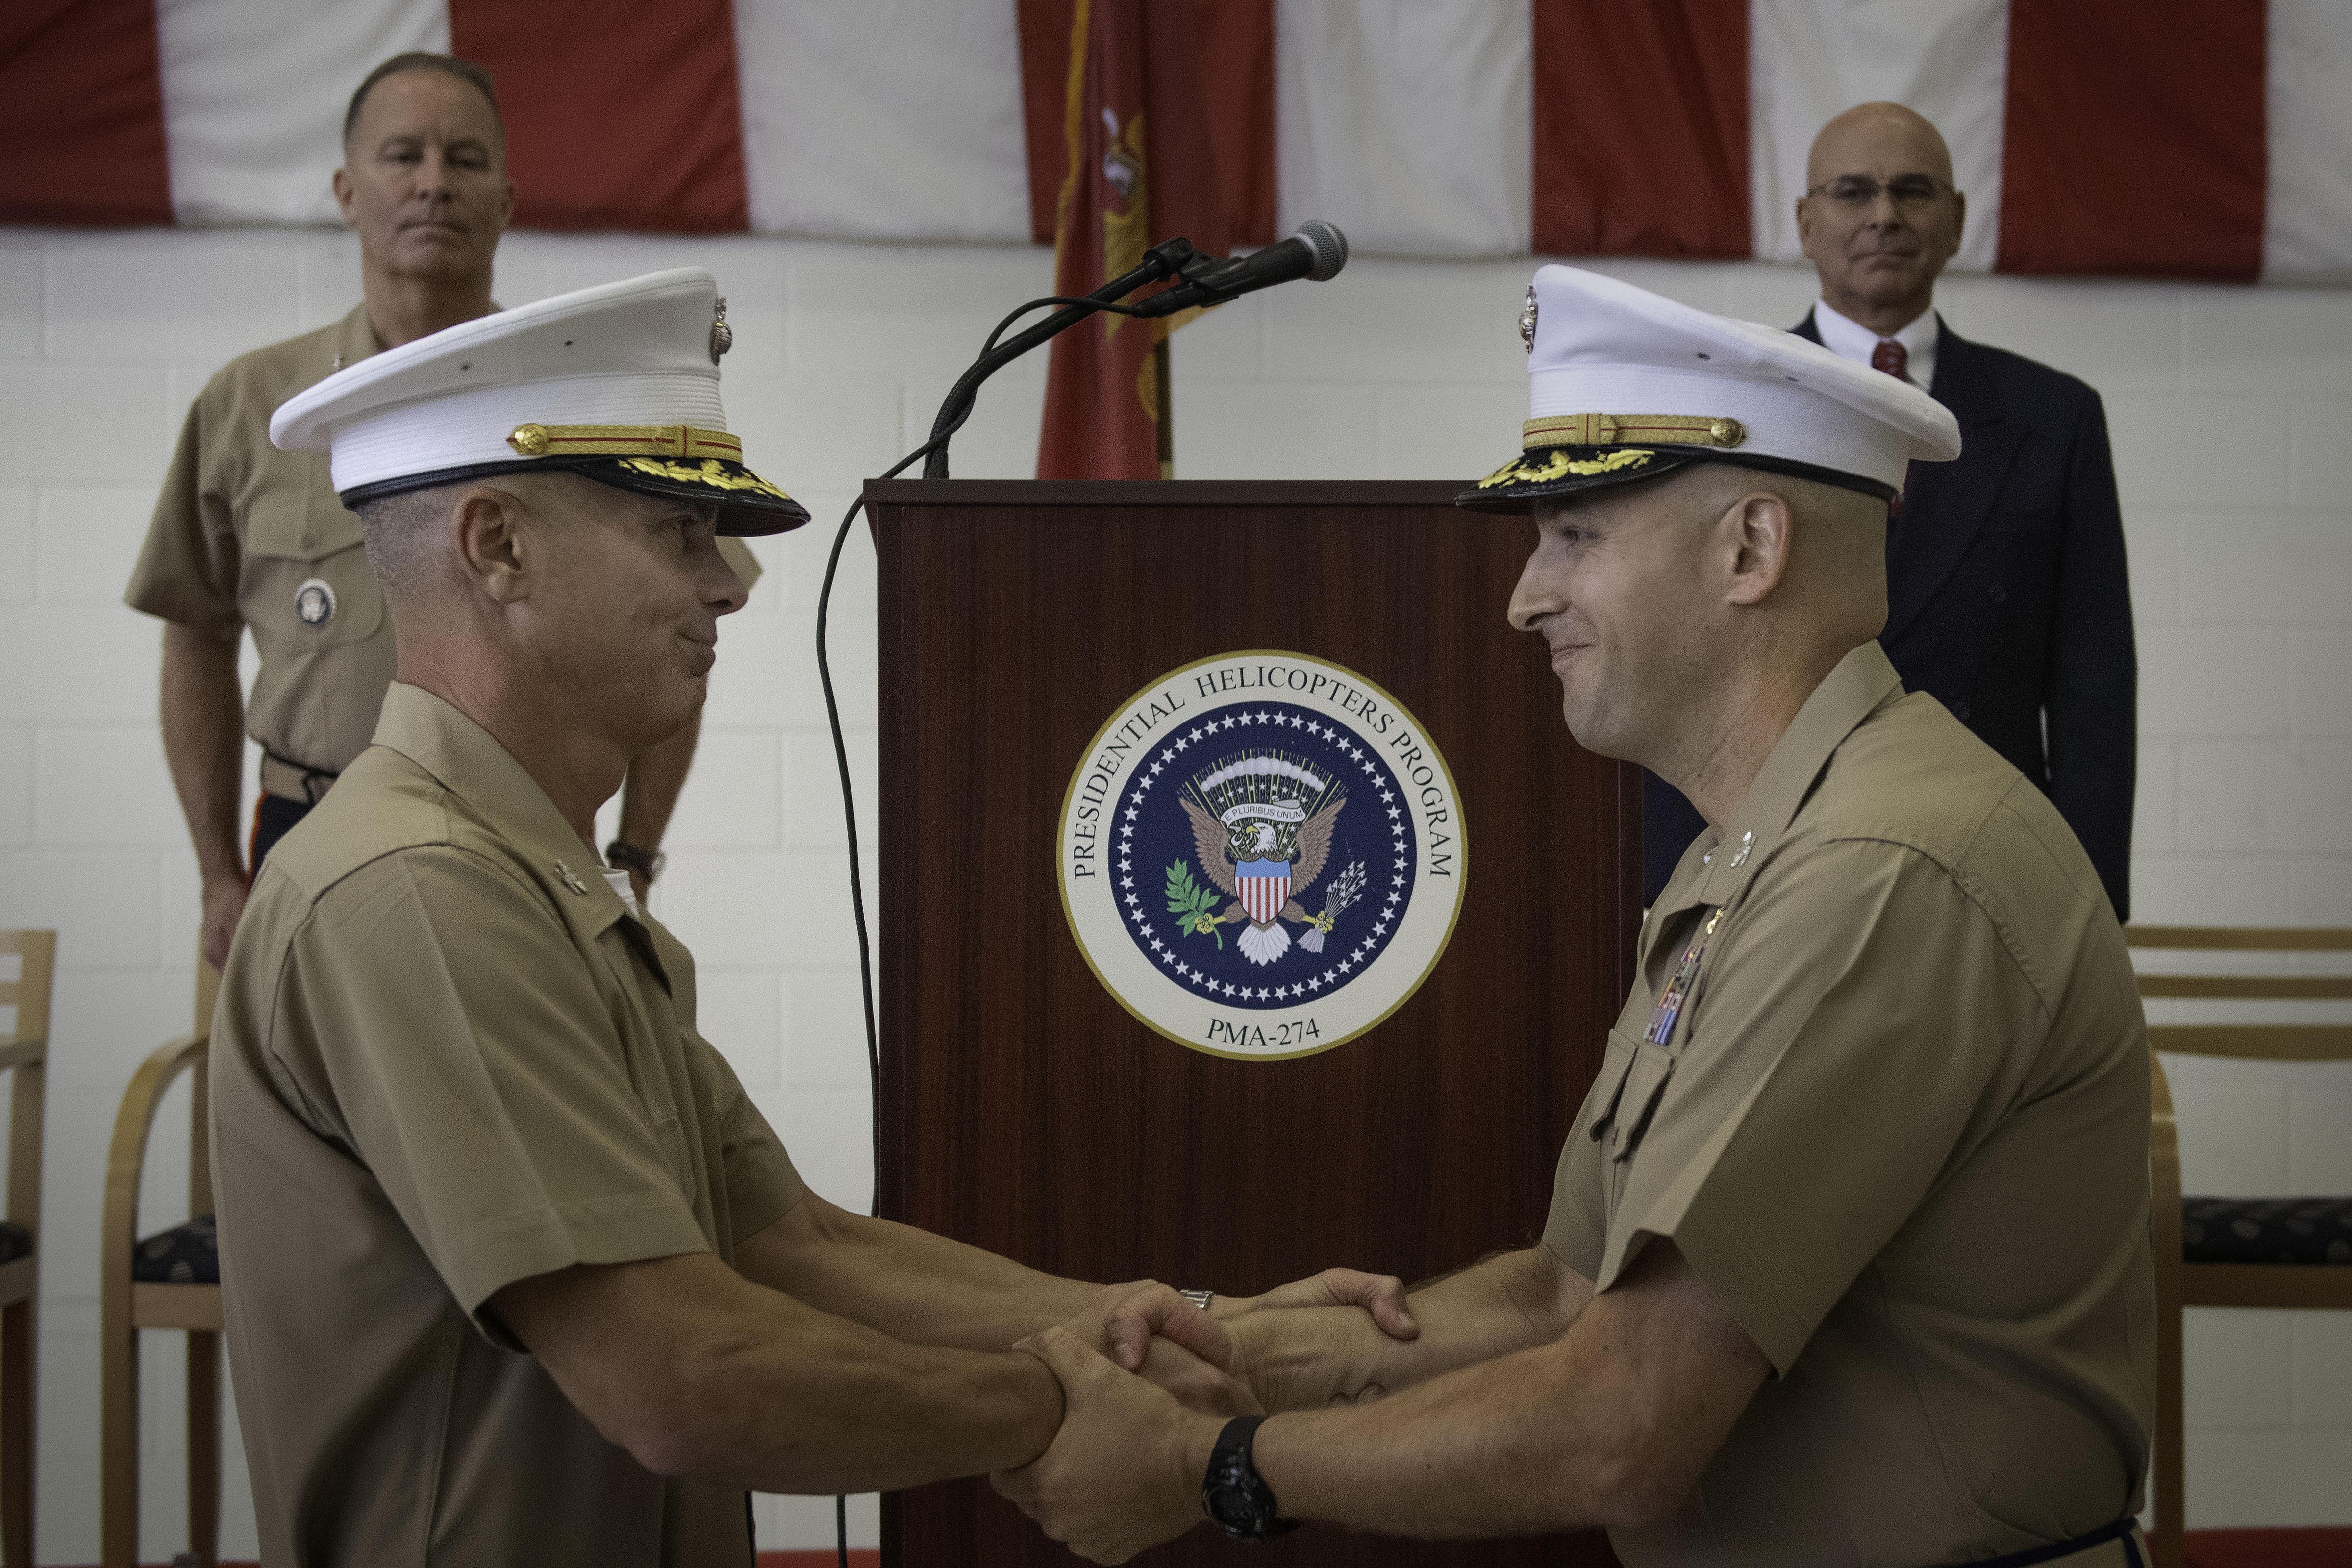 Two marines shake hands after a change of command ceremony in front of a podium with the PMA-274 seal